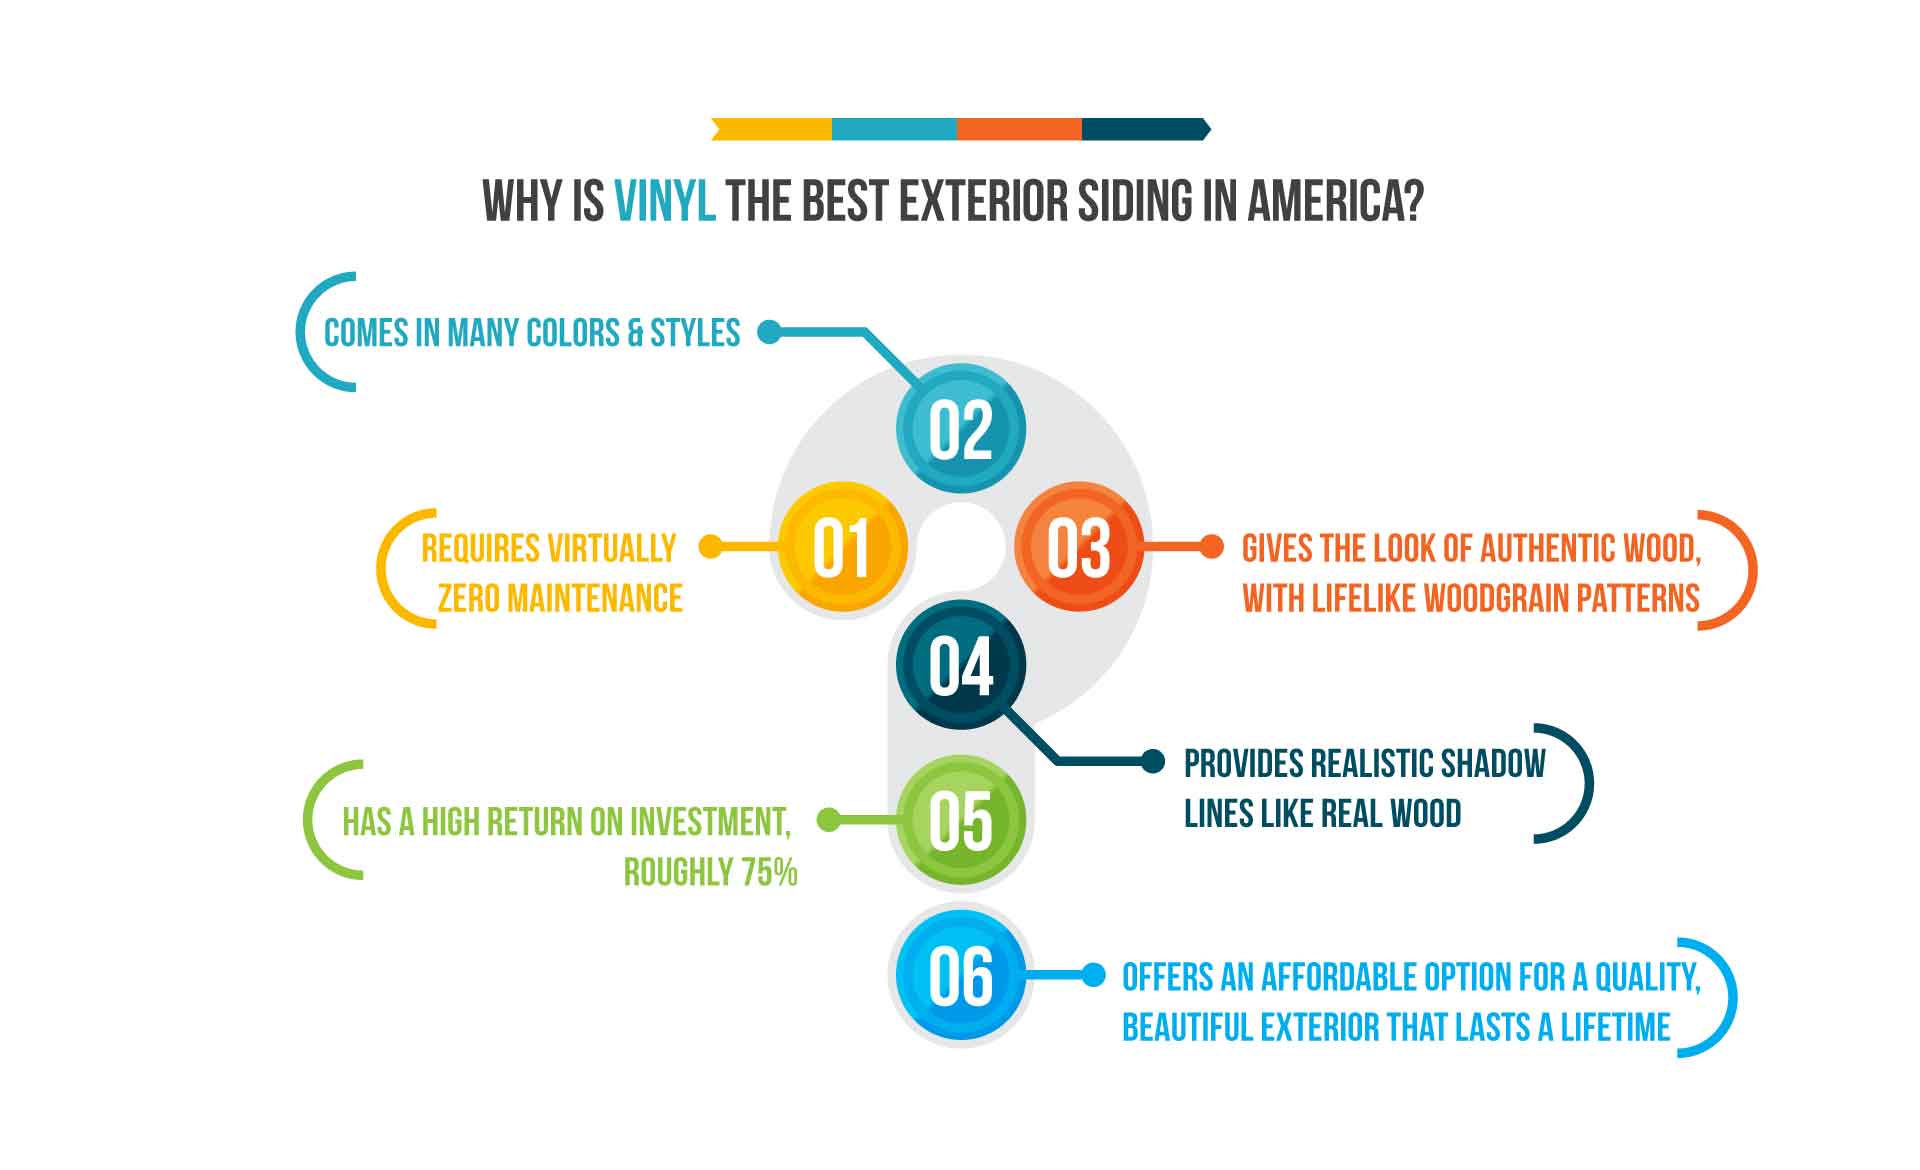 Why is vinyl the best exterior siding in America?